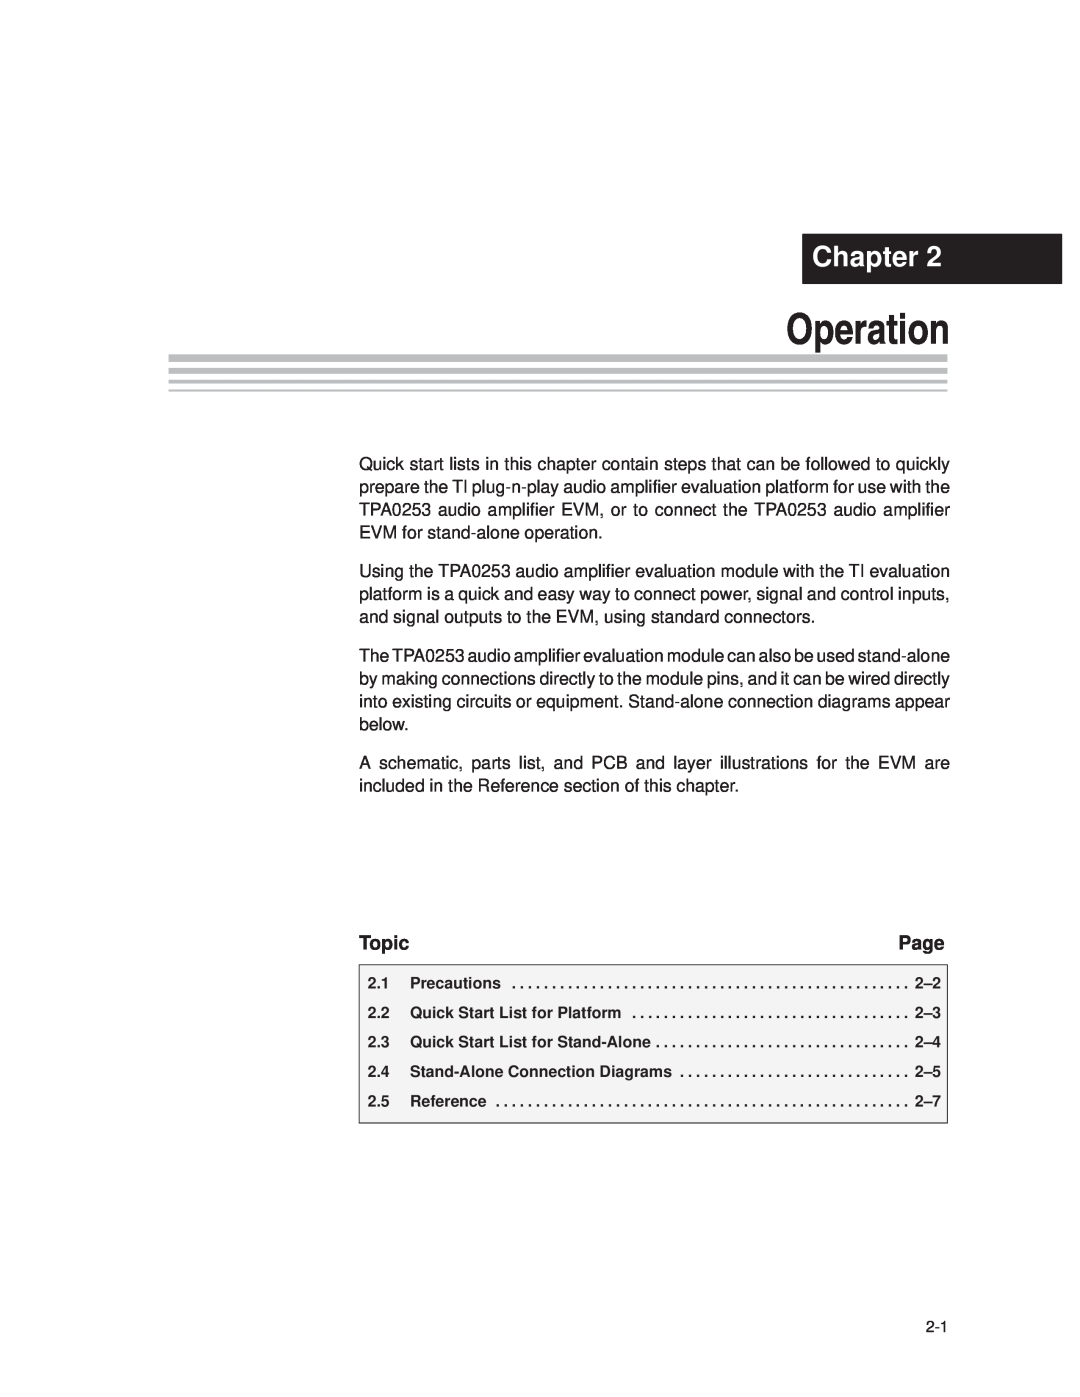 Texas Instruments TPA0253 manual Operation, Chapter, Page, Topic 